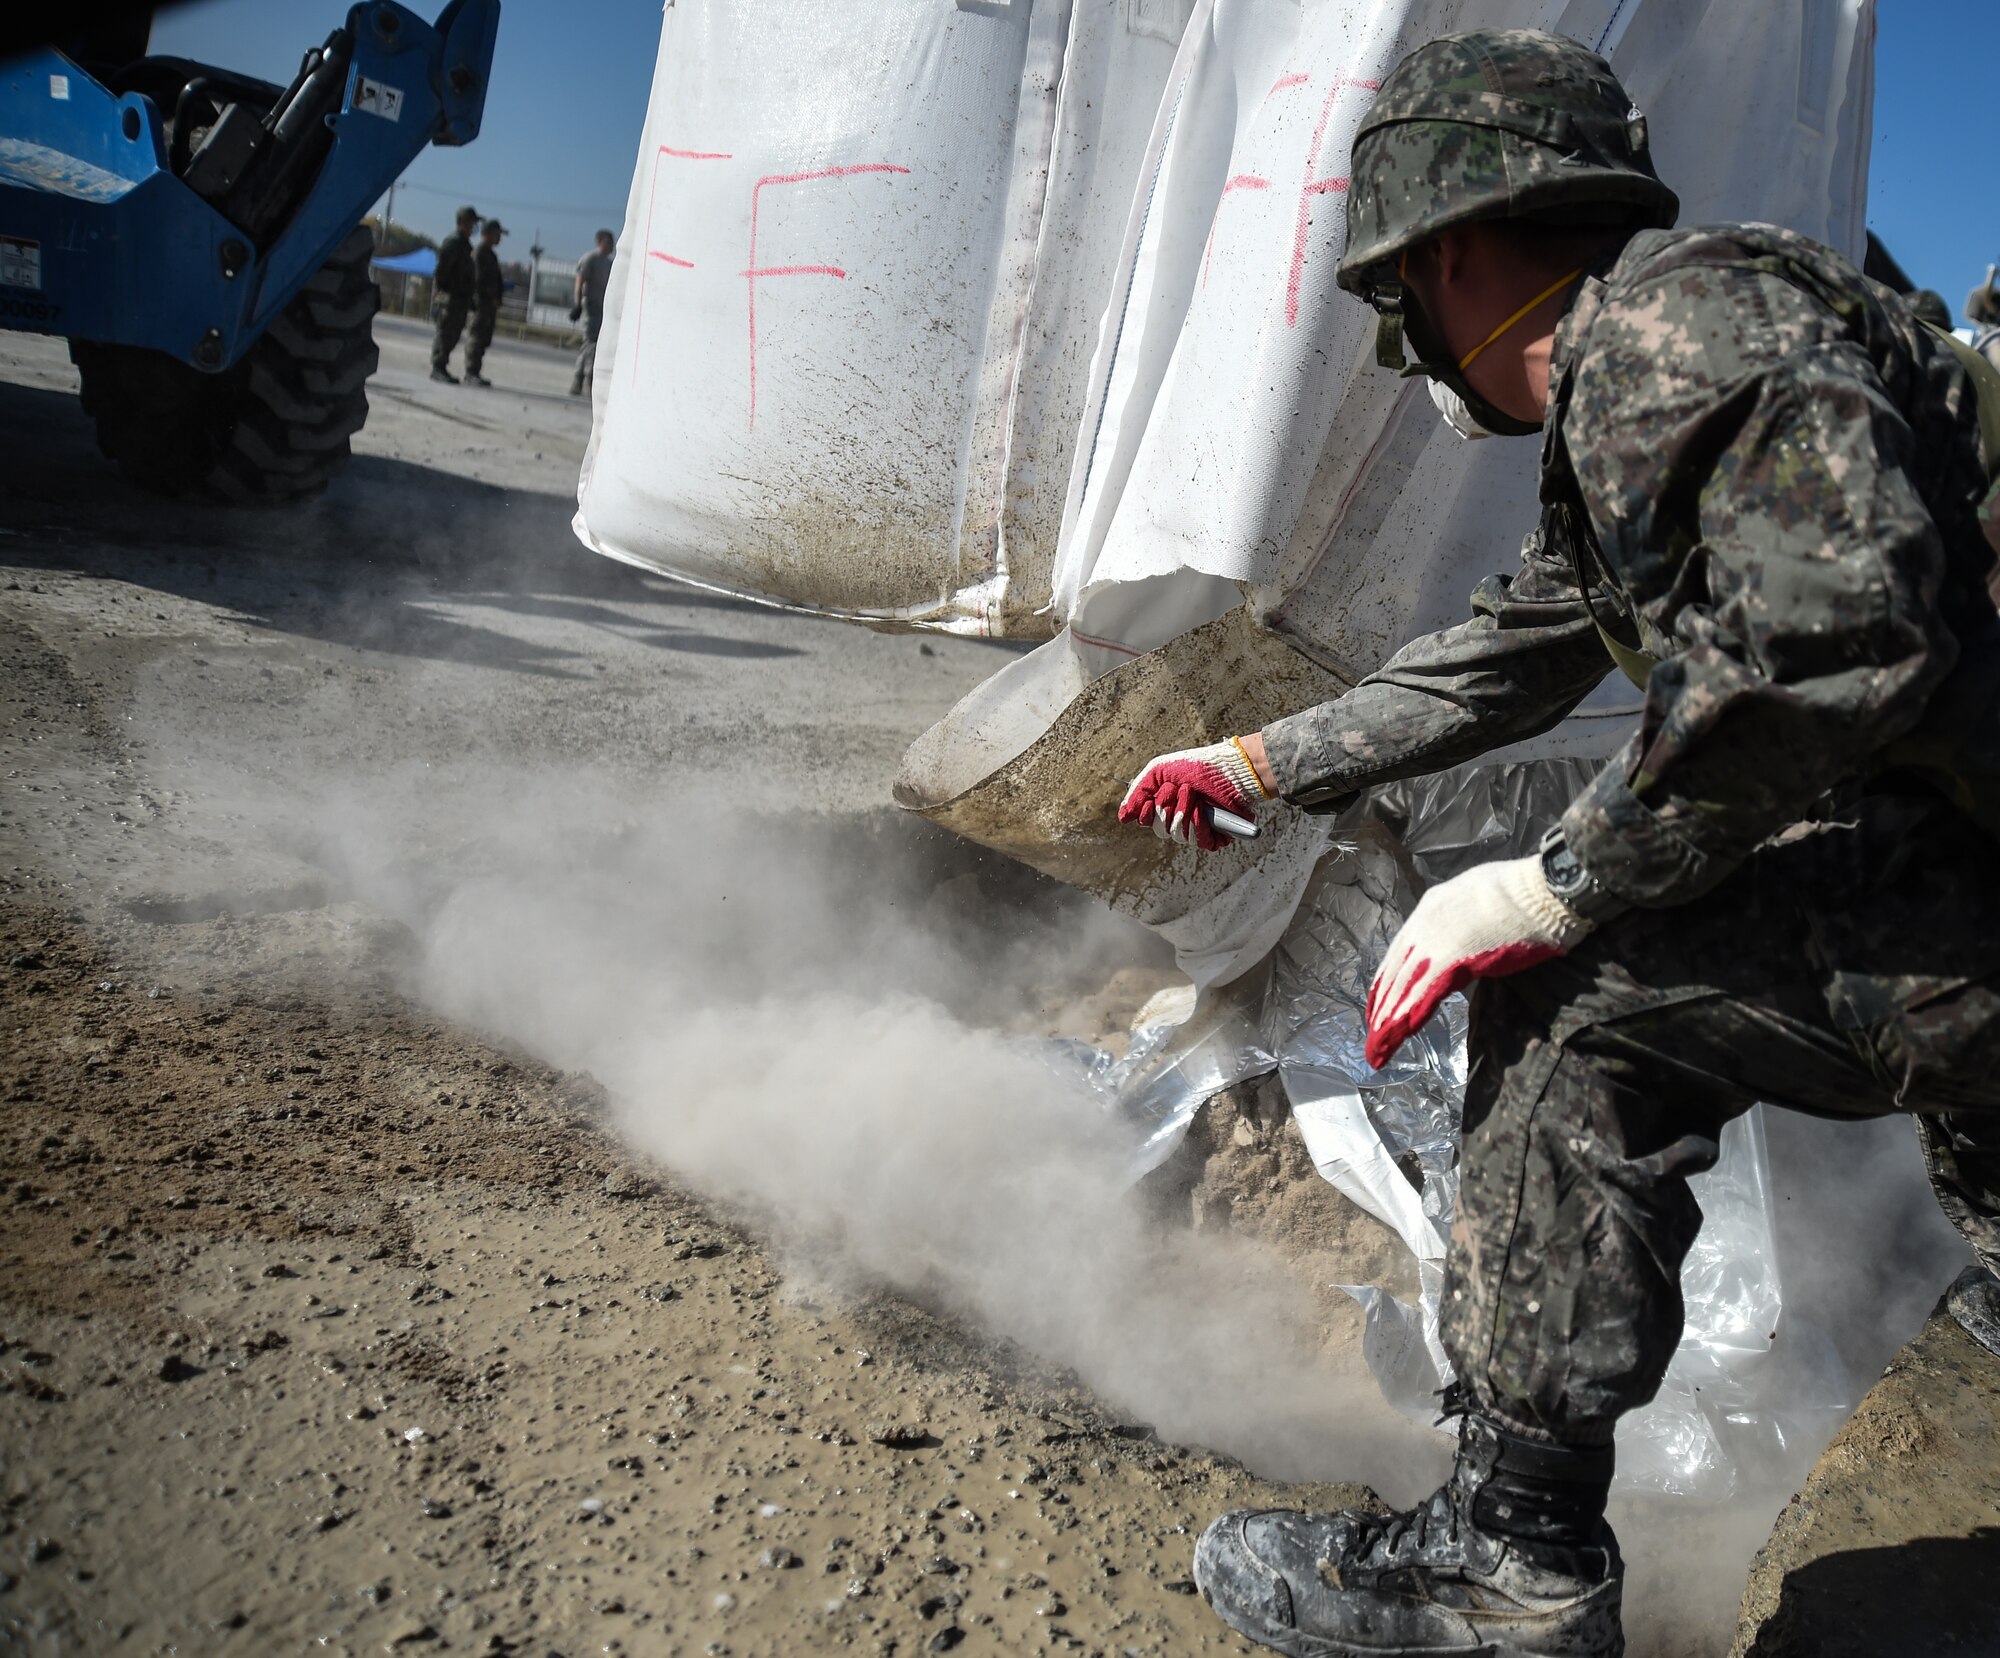 Republic of Korea Air Force Senior Airman Jinguk Kim, civilian engineer electrician, slices open a bag of quick-set concrete during a Rapid Airfield Damage Repair bilateral training exercise at Gwangju Air Base, Republic of Korea, Nov. 9, 2017. Similar to an assembly line, RADR systematically lines up civil engineer personnel and equipment to quickly repair a runway after attack. The training exercise was designed to enhance interoperability, prepare for wartime contingencies and strengthen partnerships in the Indo-Asia Pacific region. (U.S. Air Force photo by Senior Airman Curt Beach)